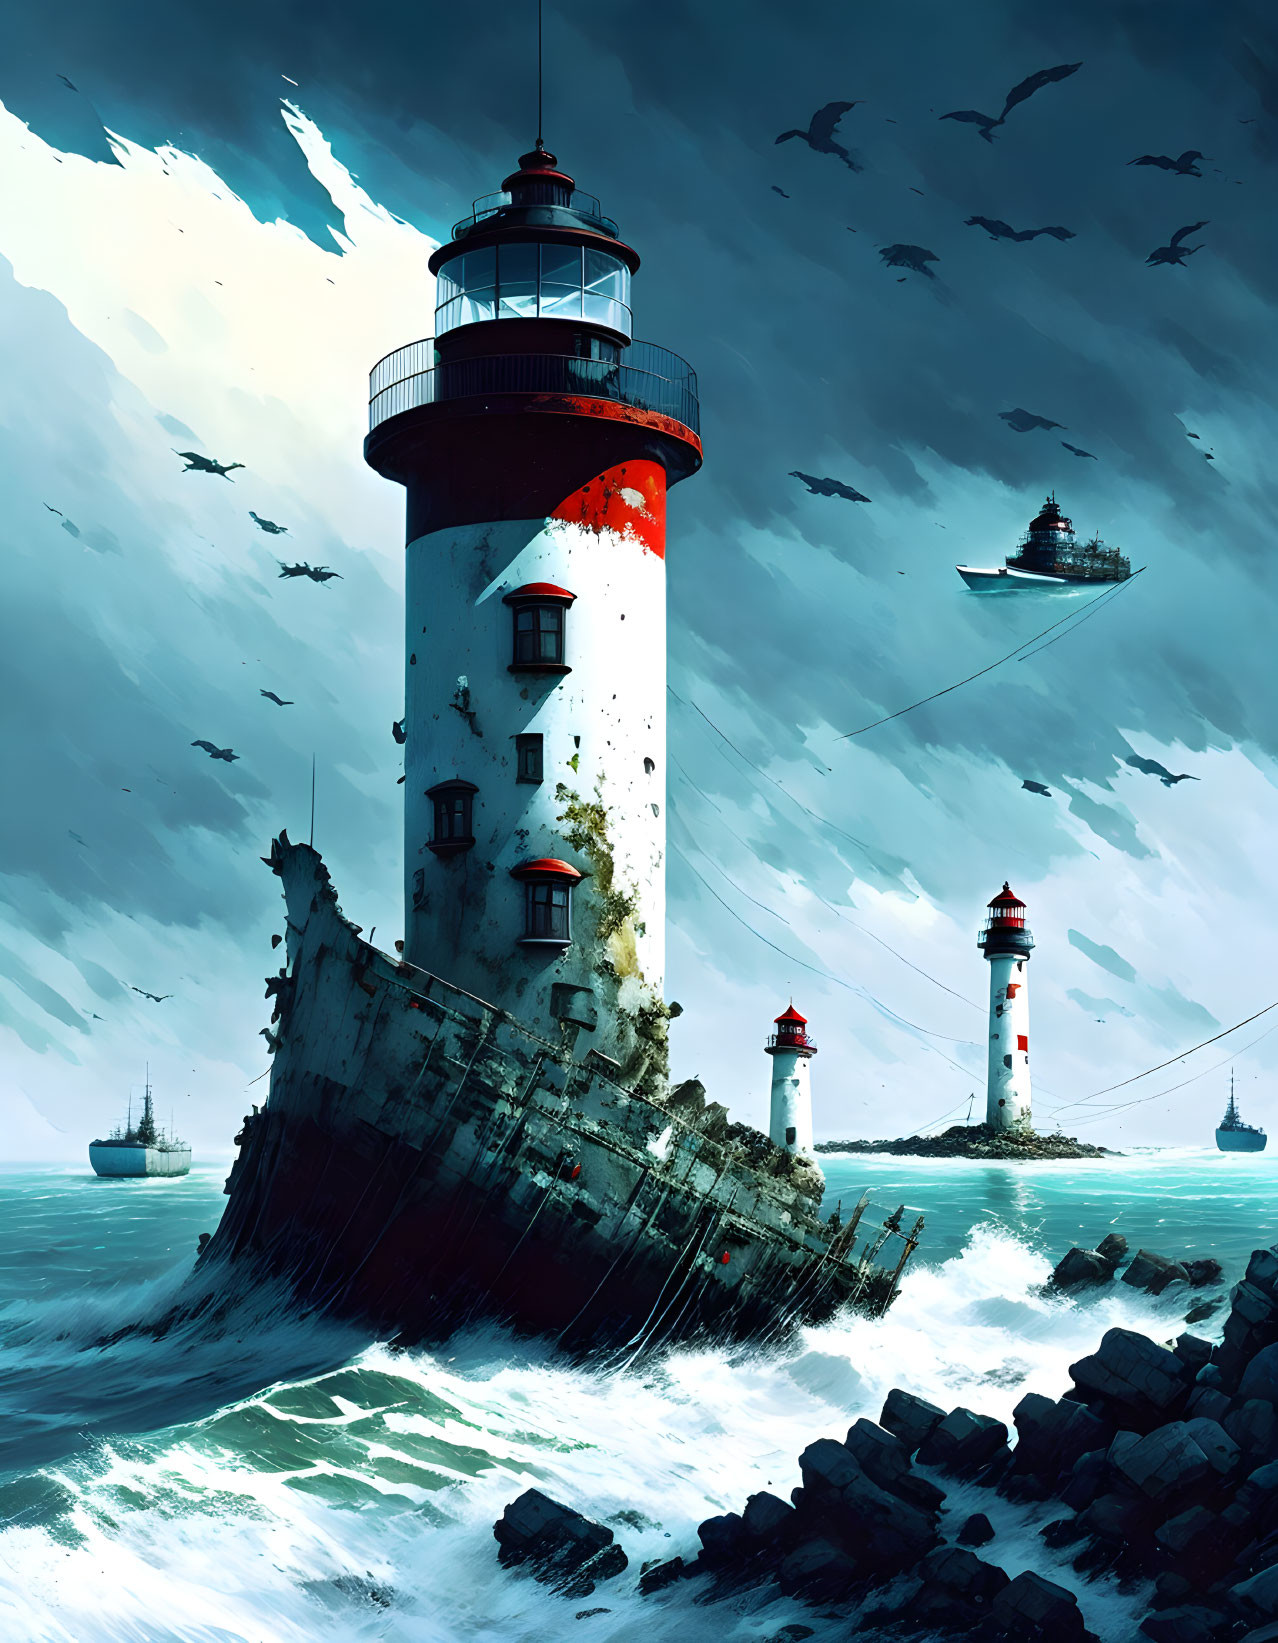 Digital art: Multiple lighthouses on rugged coast with ships and stormy sky